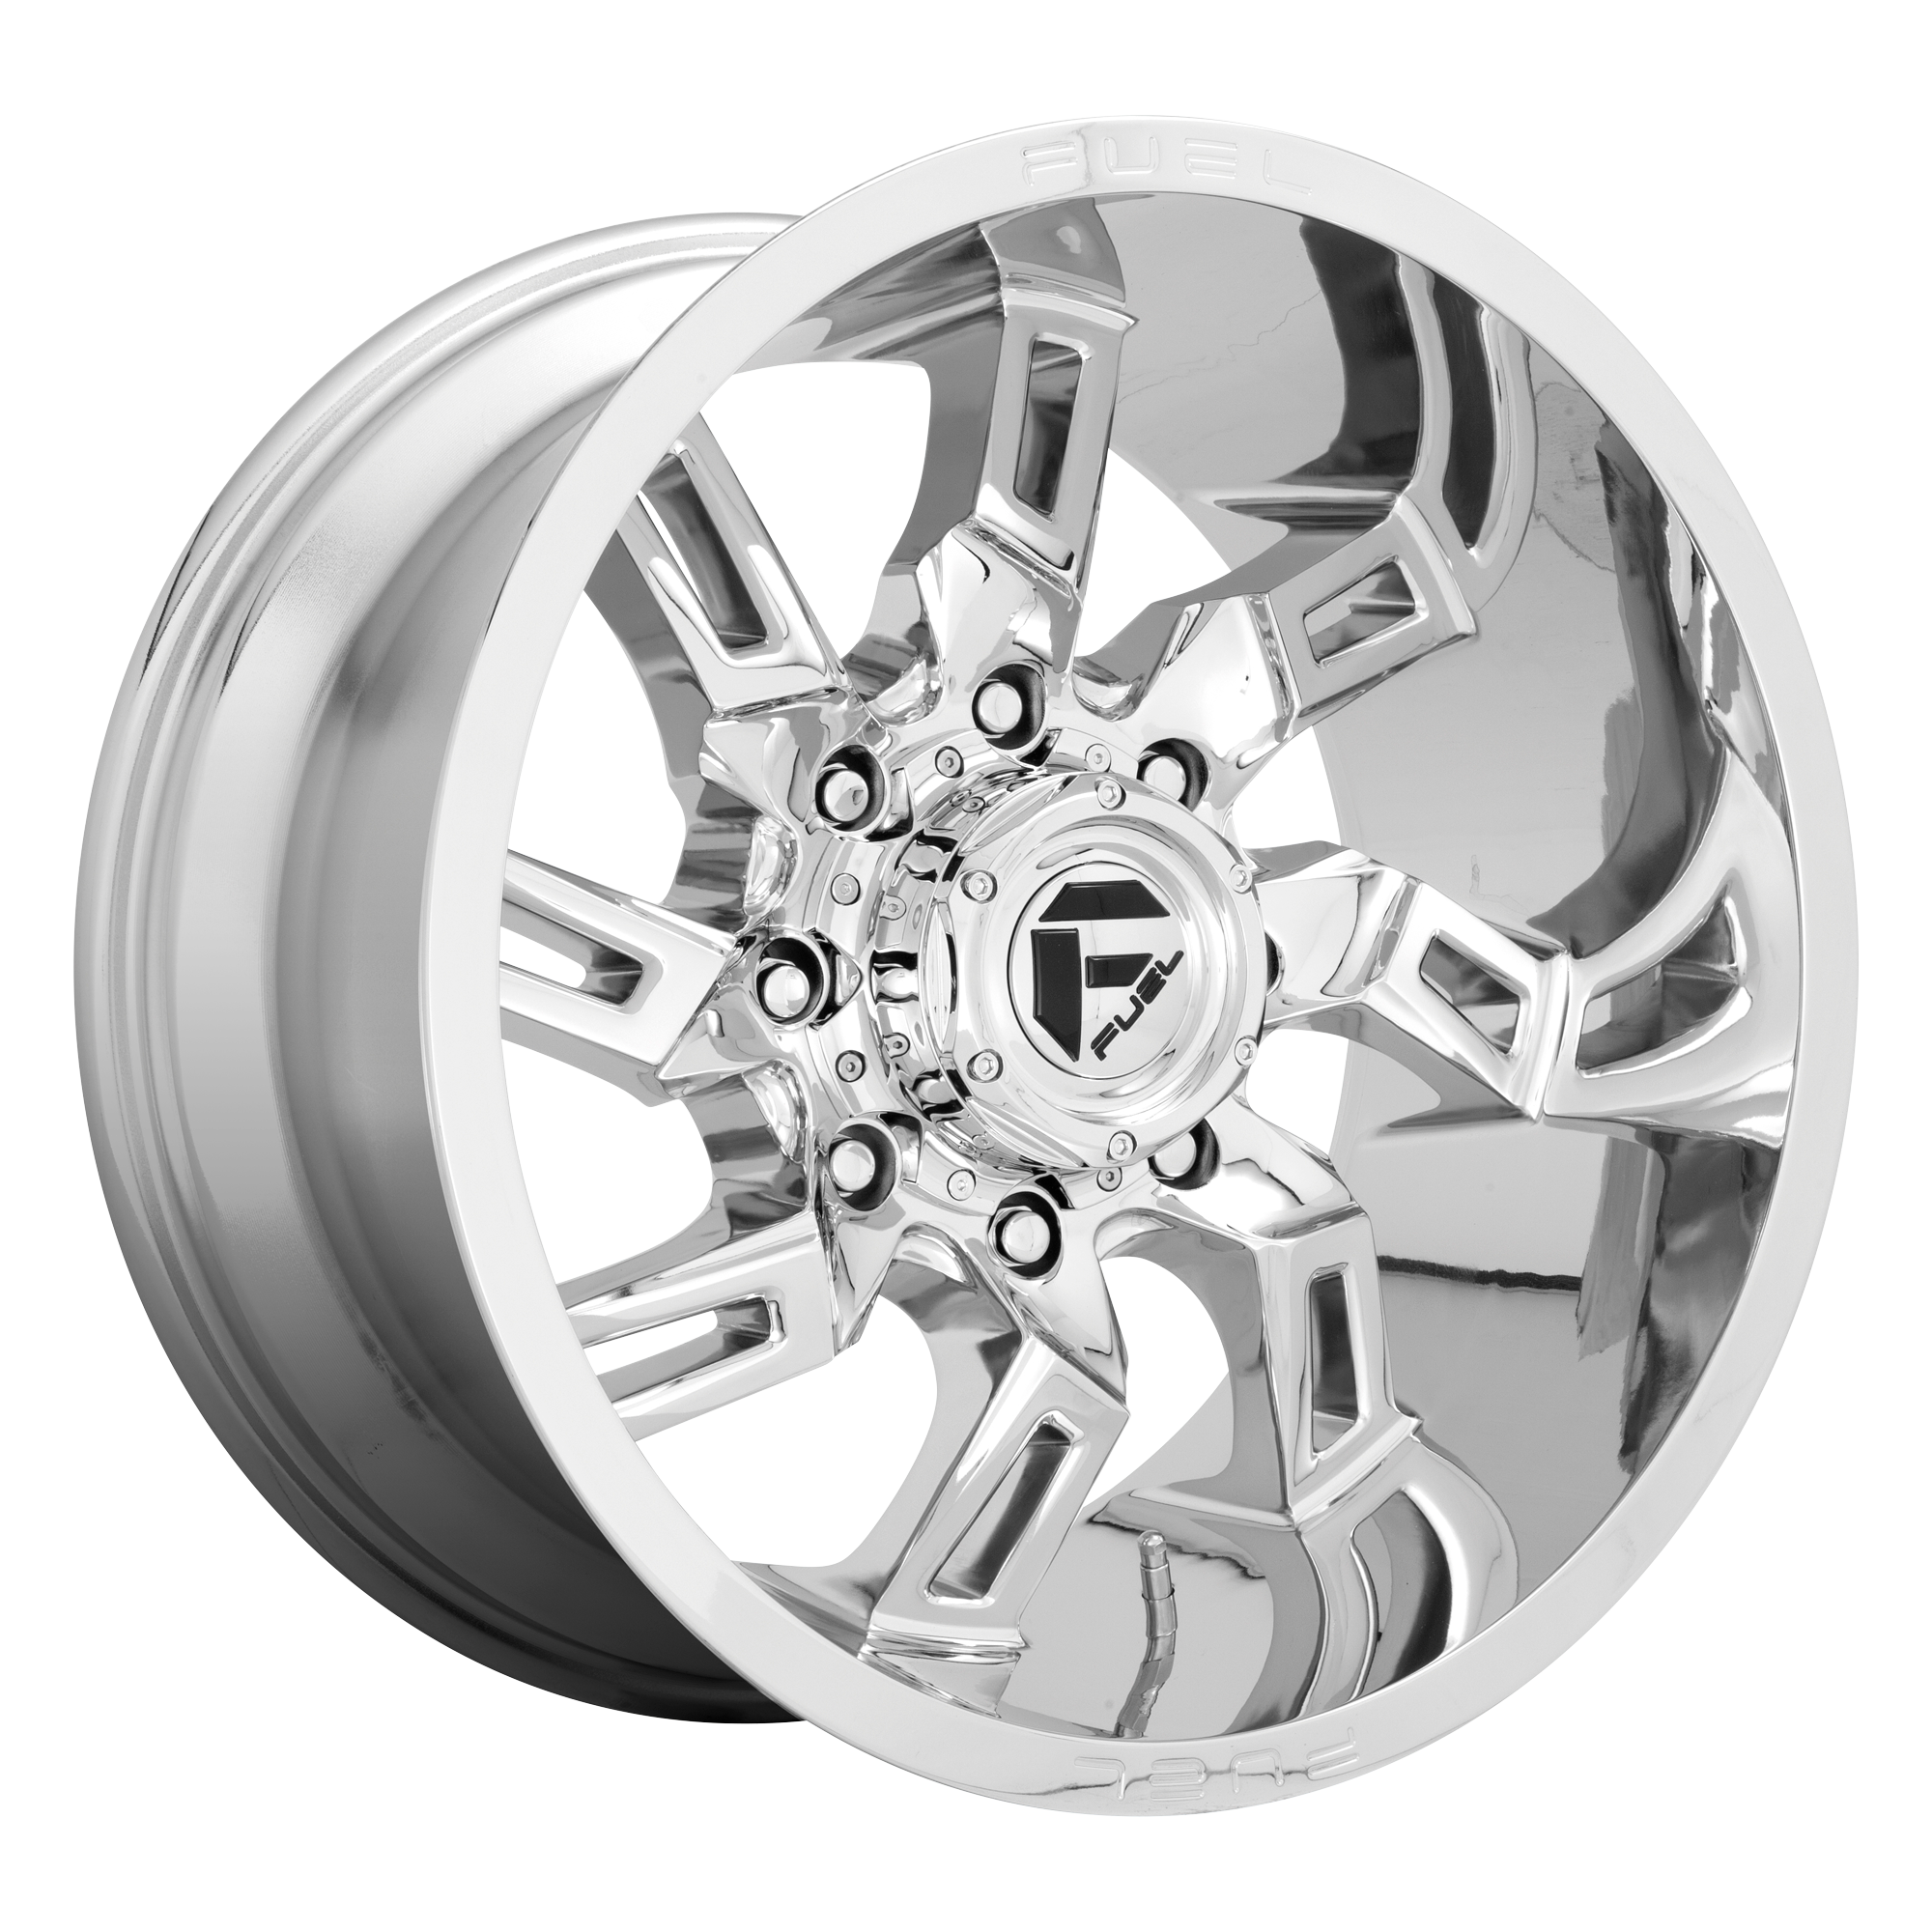 LOCKDOWN 20x10 6x139.70 CHROME (-18 mm) - Tires and Engine Performance